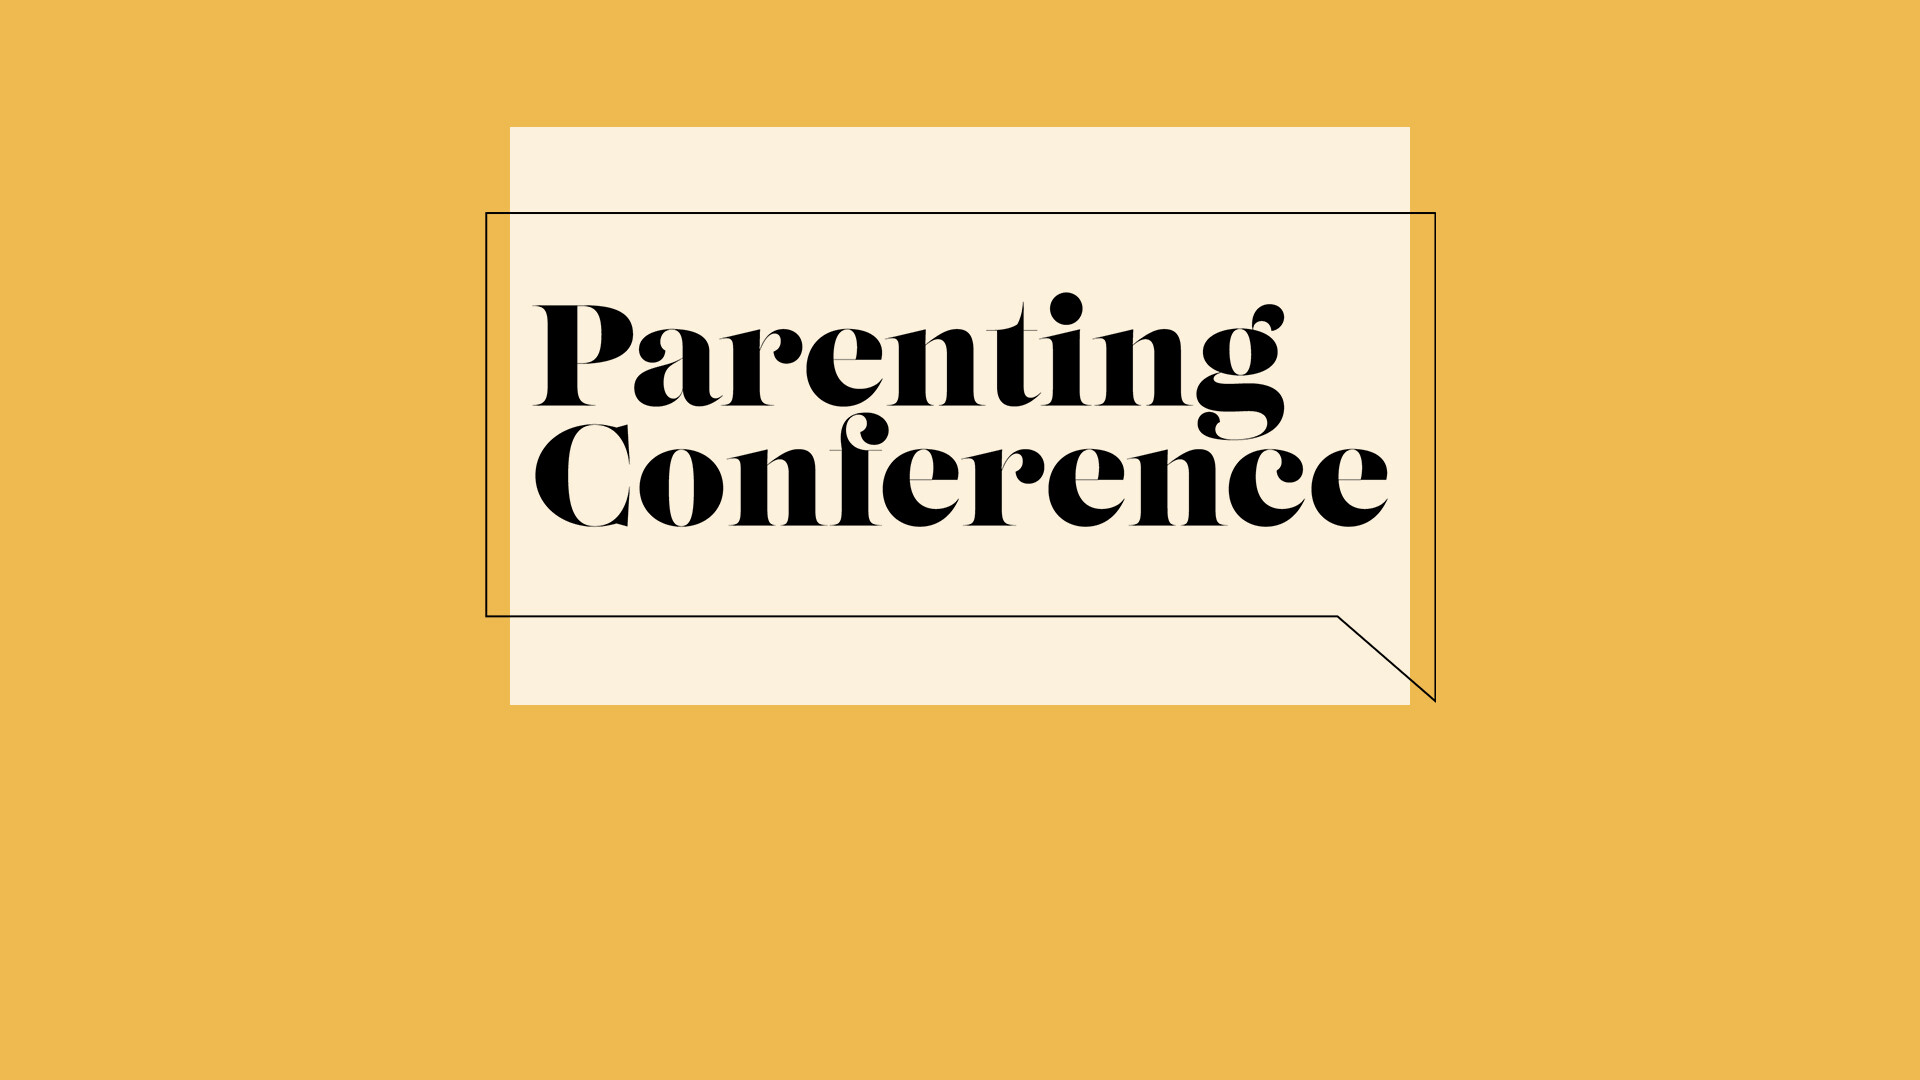 Parenting Conference